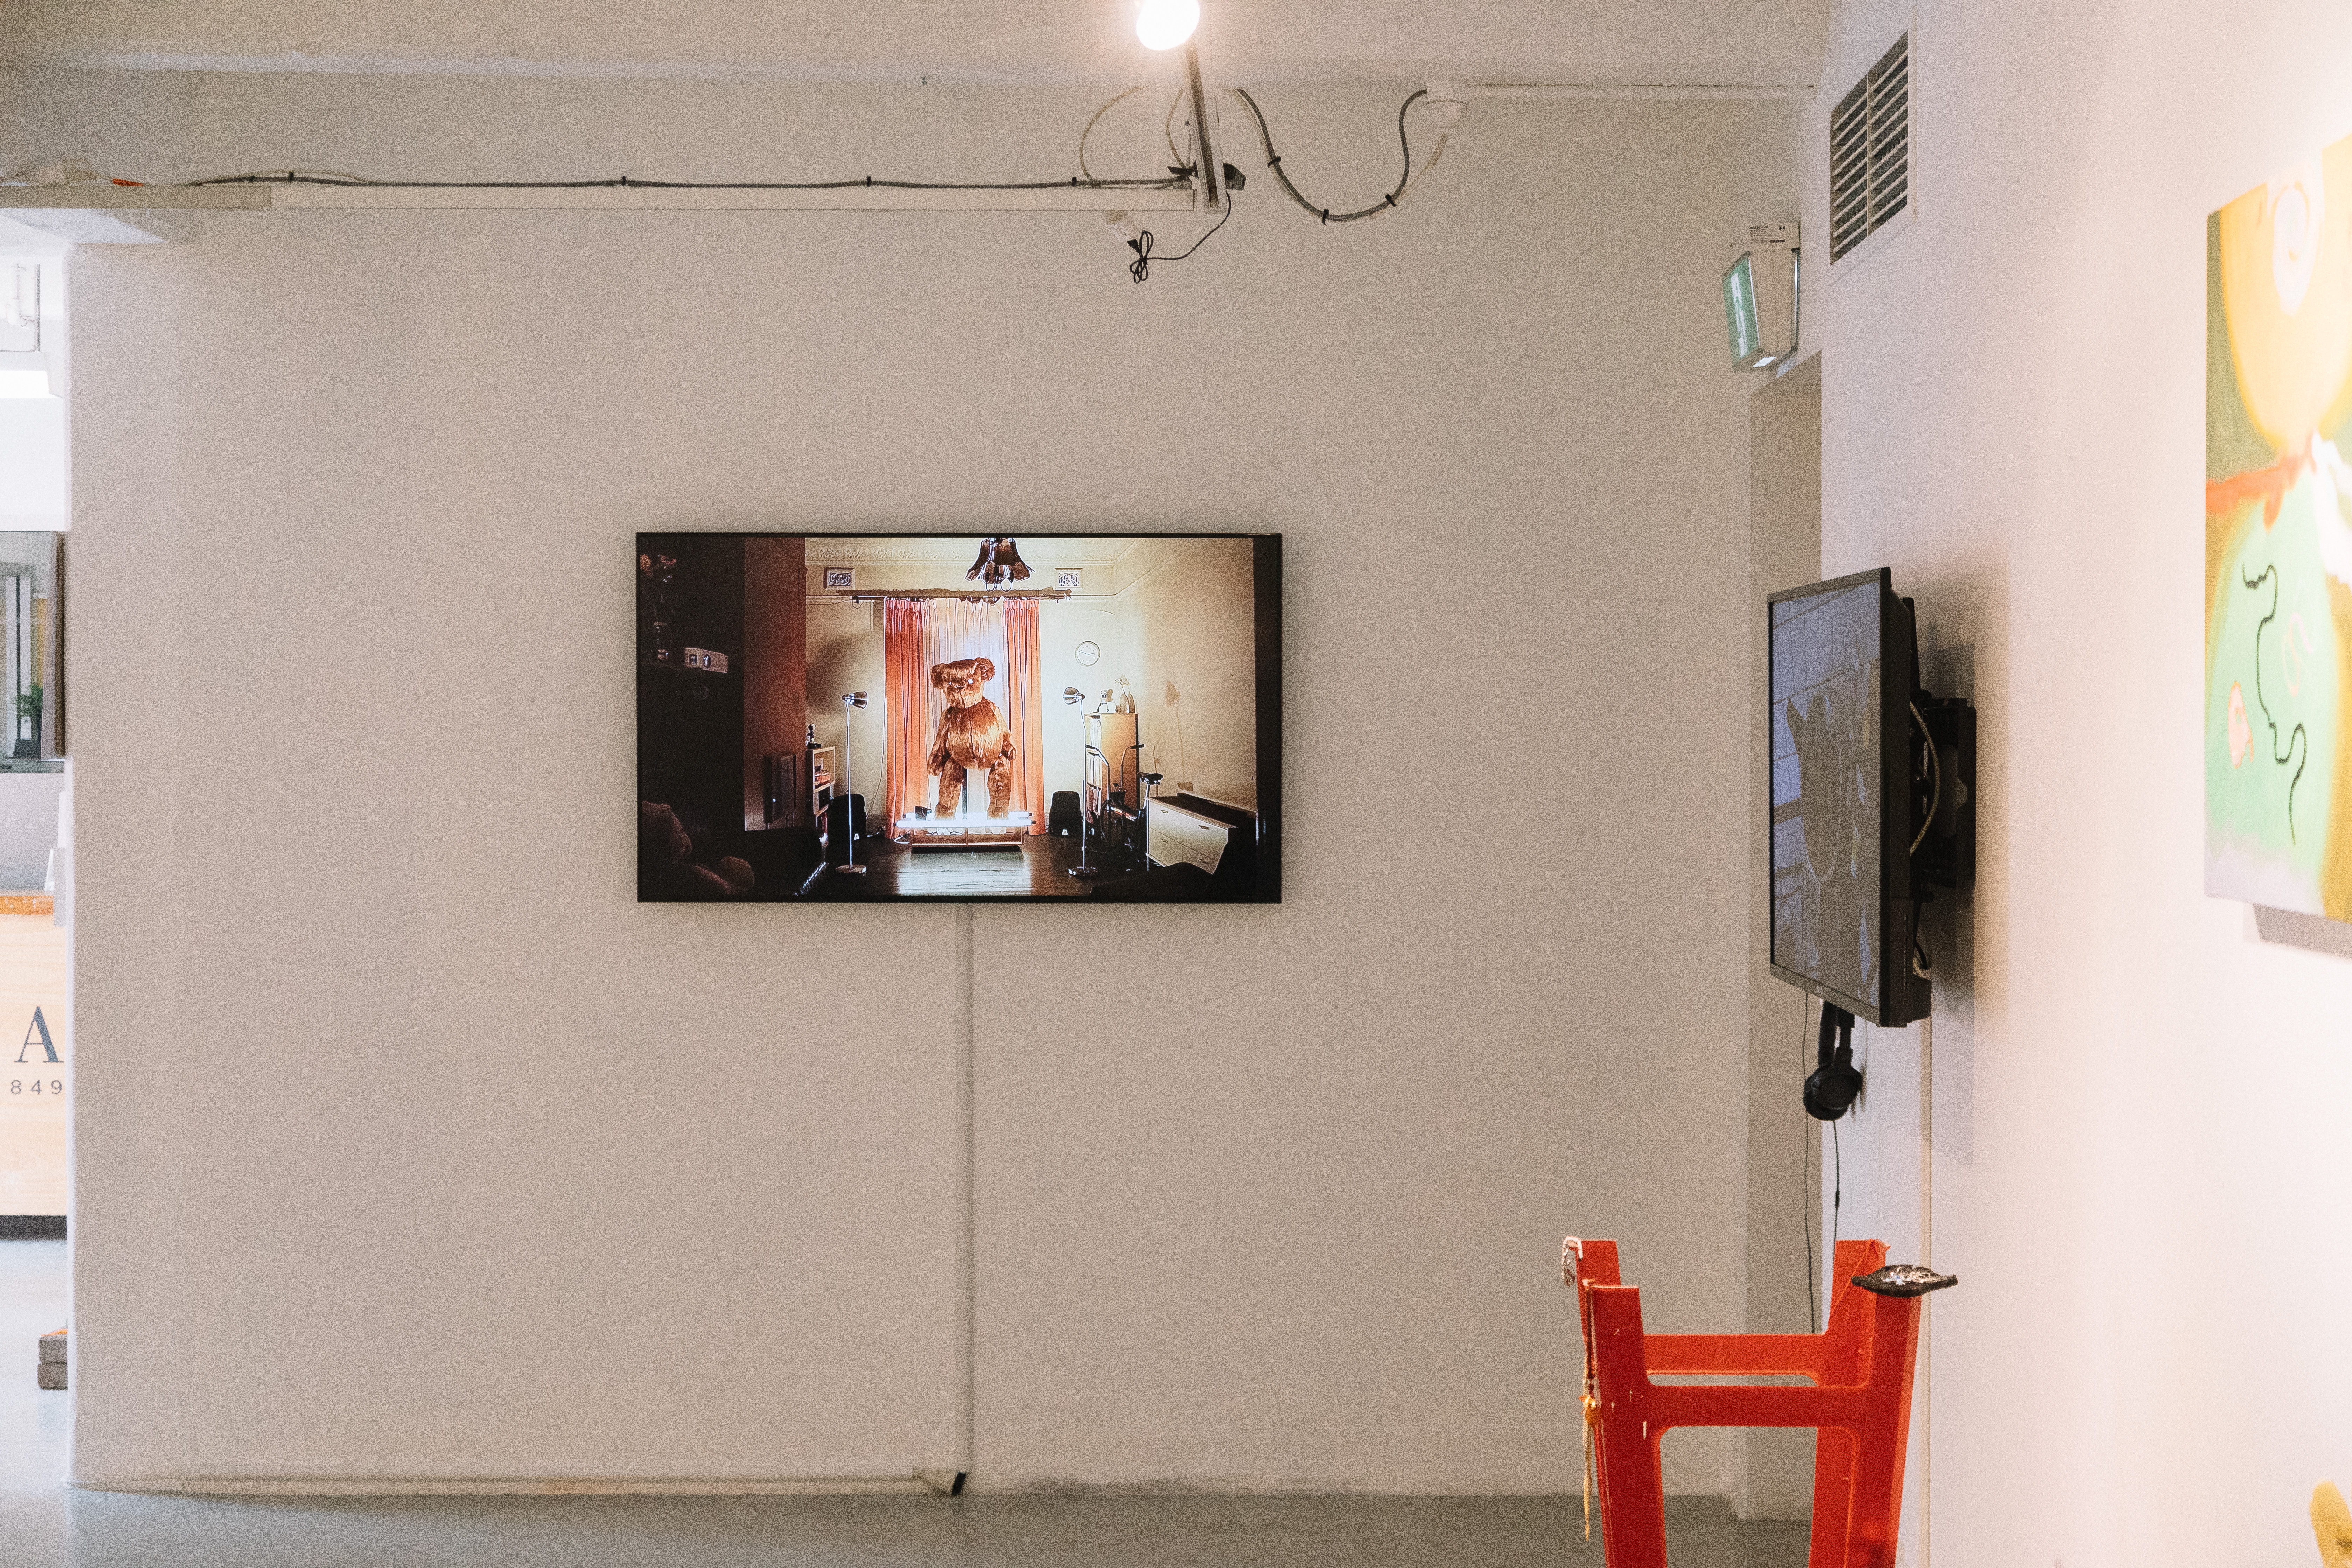 Installation documentation showing a teddy bear on a wall mounted screen and some paintings and sculpture.